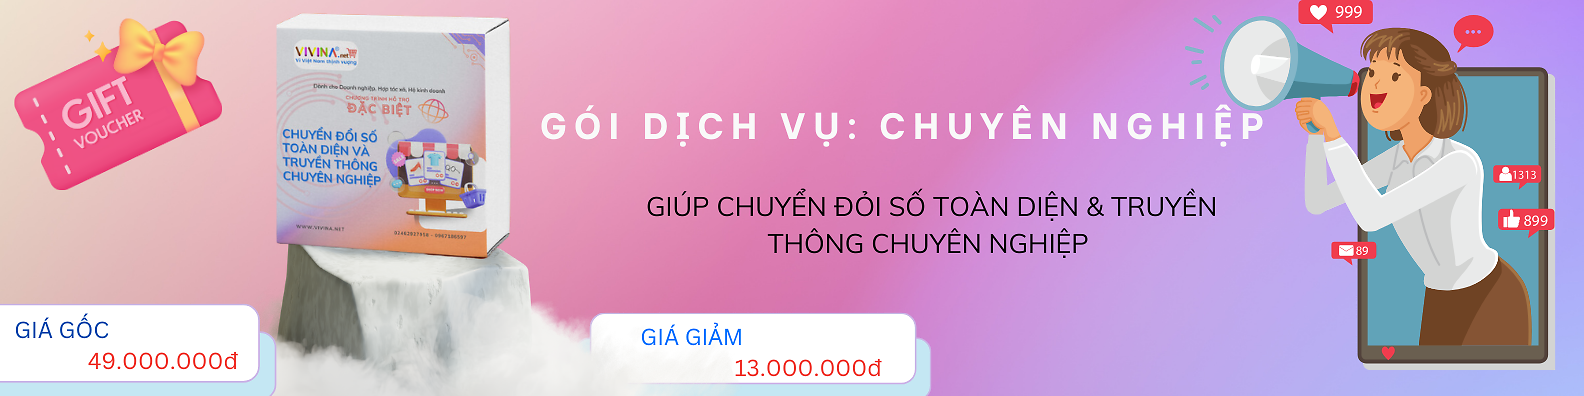 Combo - Dịch vụ